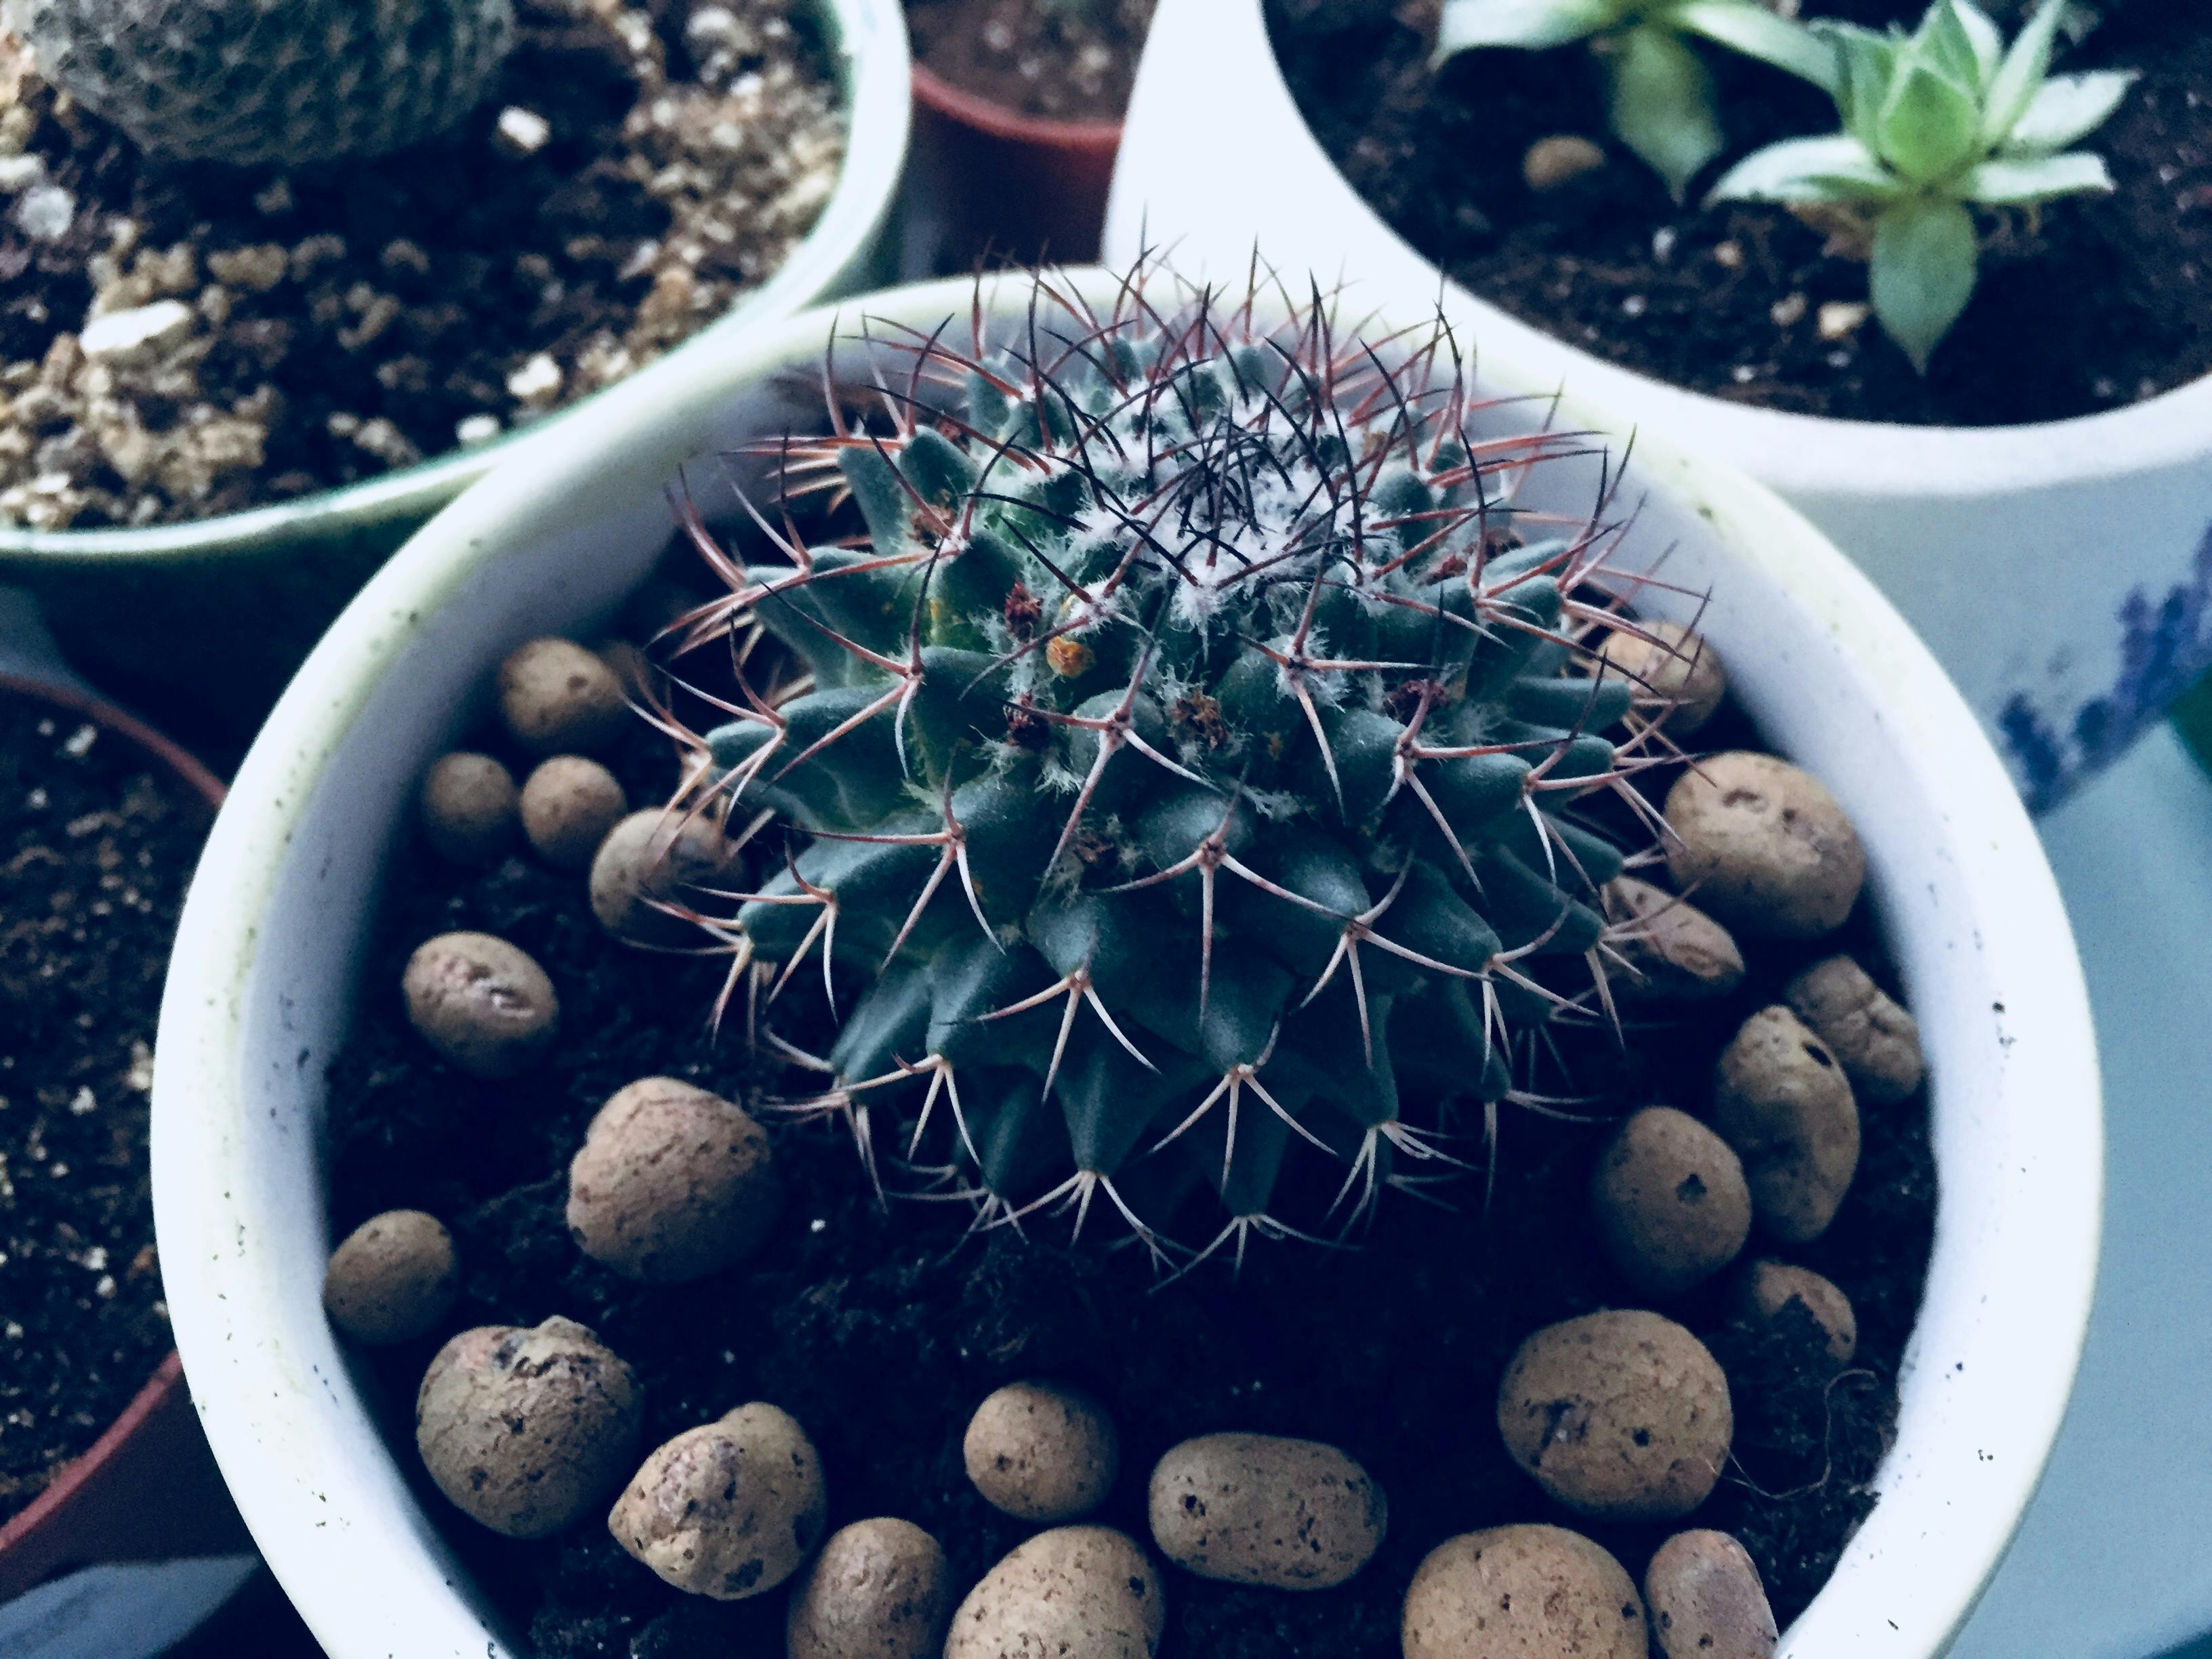 Free stock photo of cactus, indoor plant, spines